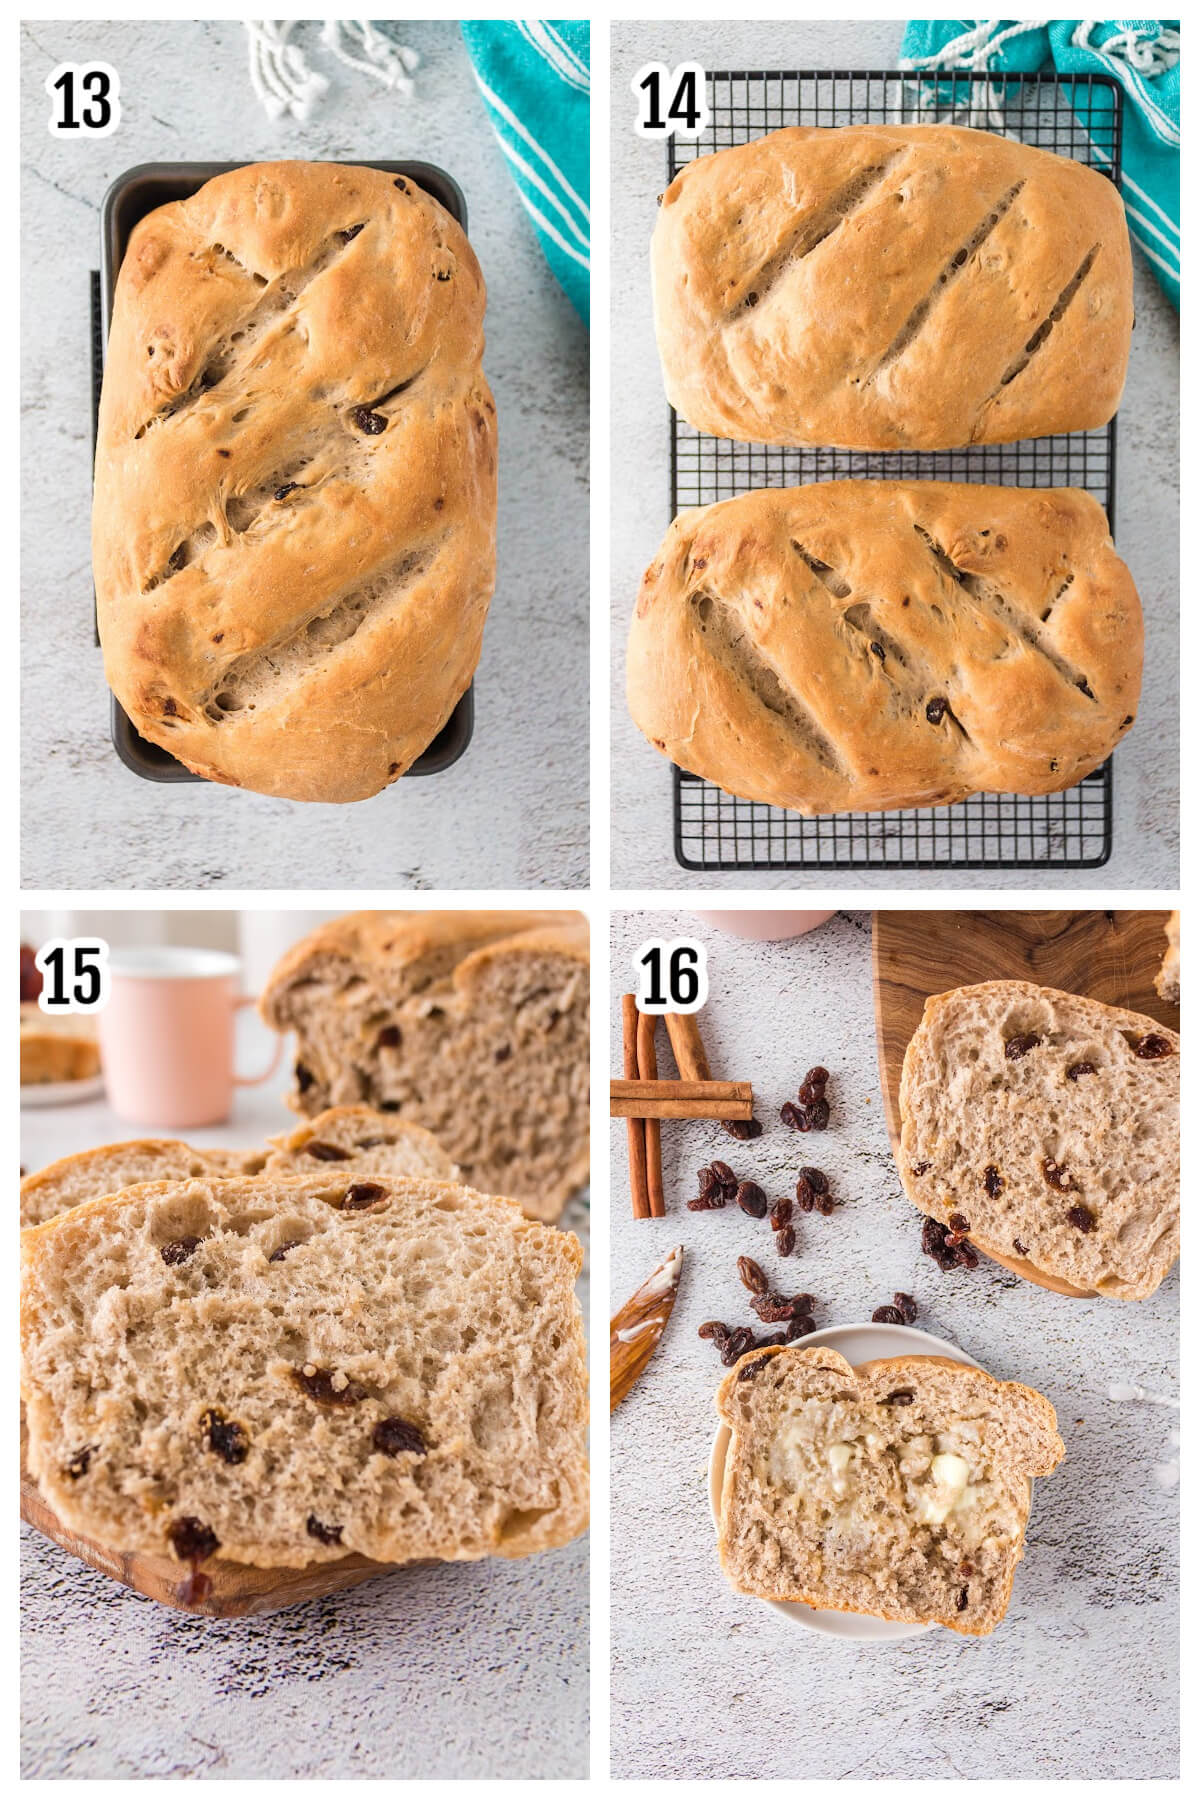 Fourth set of steps for making the Raisin Bread. 